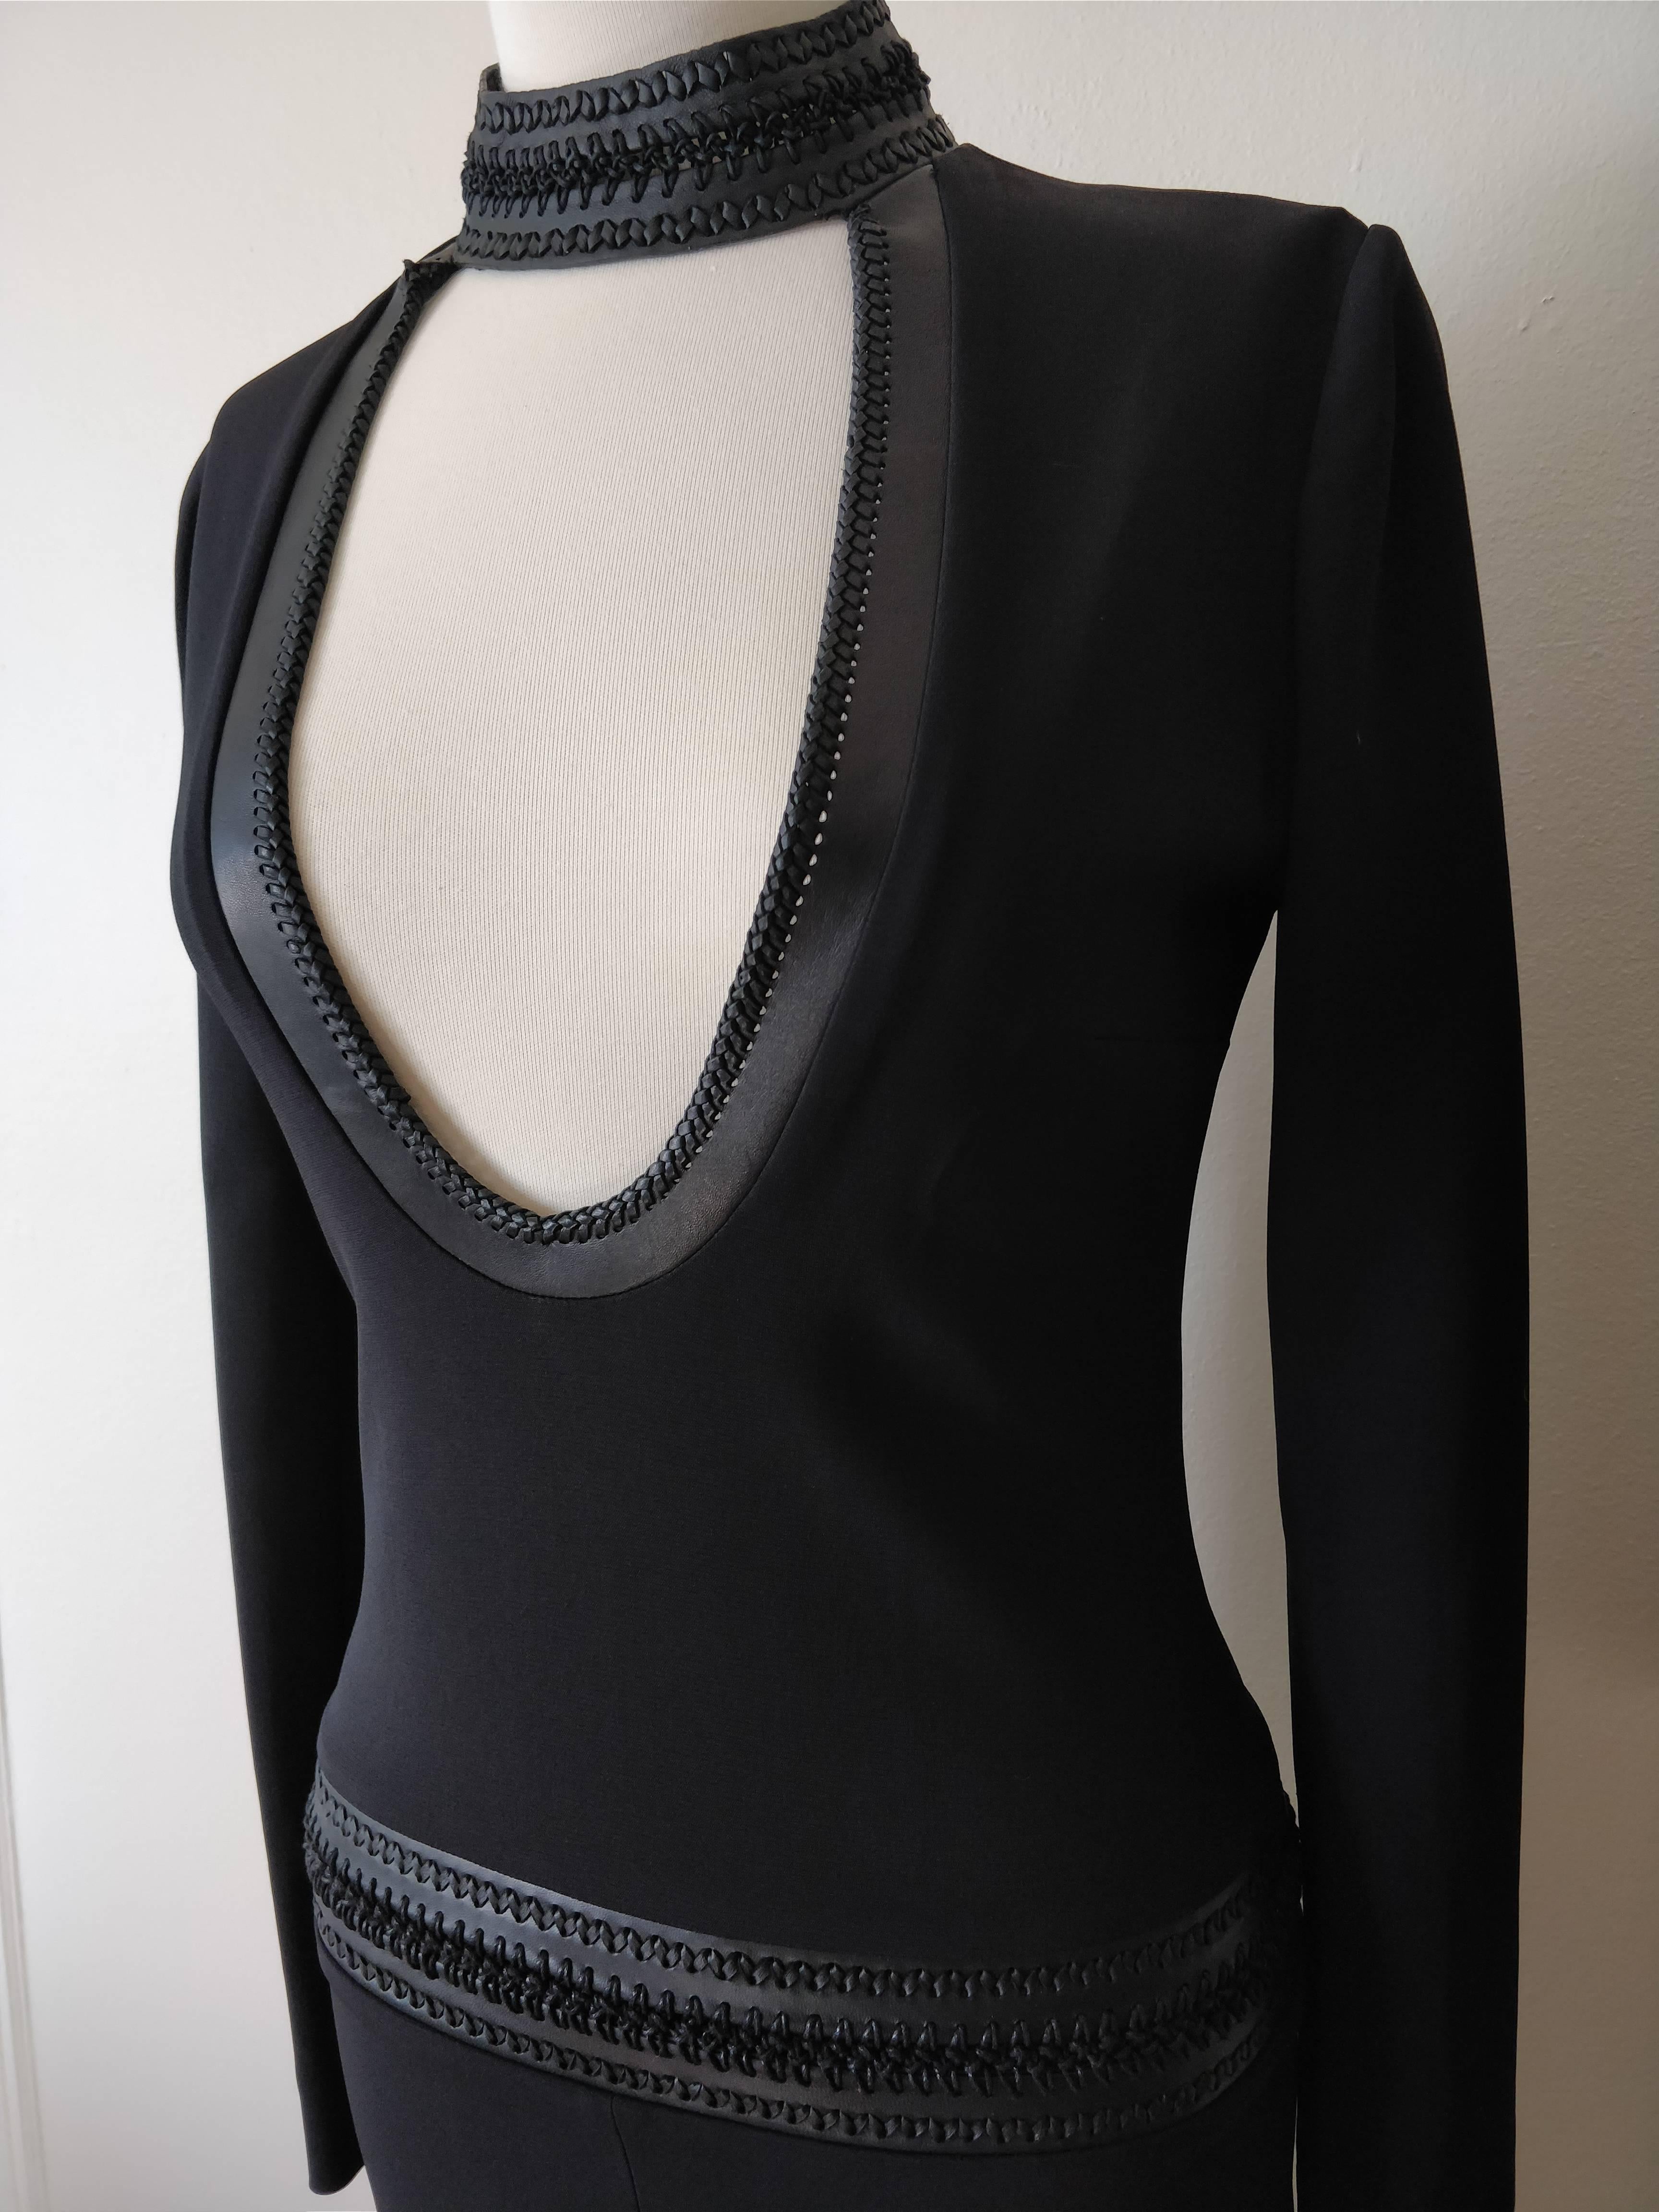 A Tom Ford Boho-chic 1960s-inspired black knit dress with leather banding and braid at hips. Choker-style neckline with scooped out decolletage edged in braided leather.  Zippered back. Never worn. 